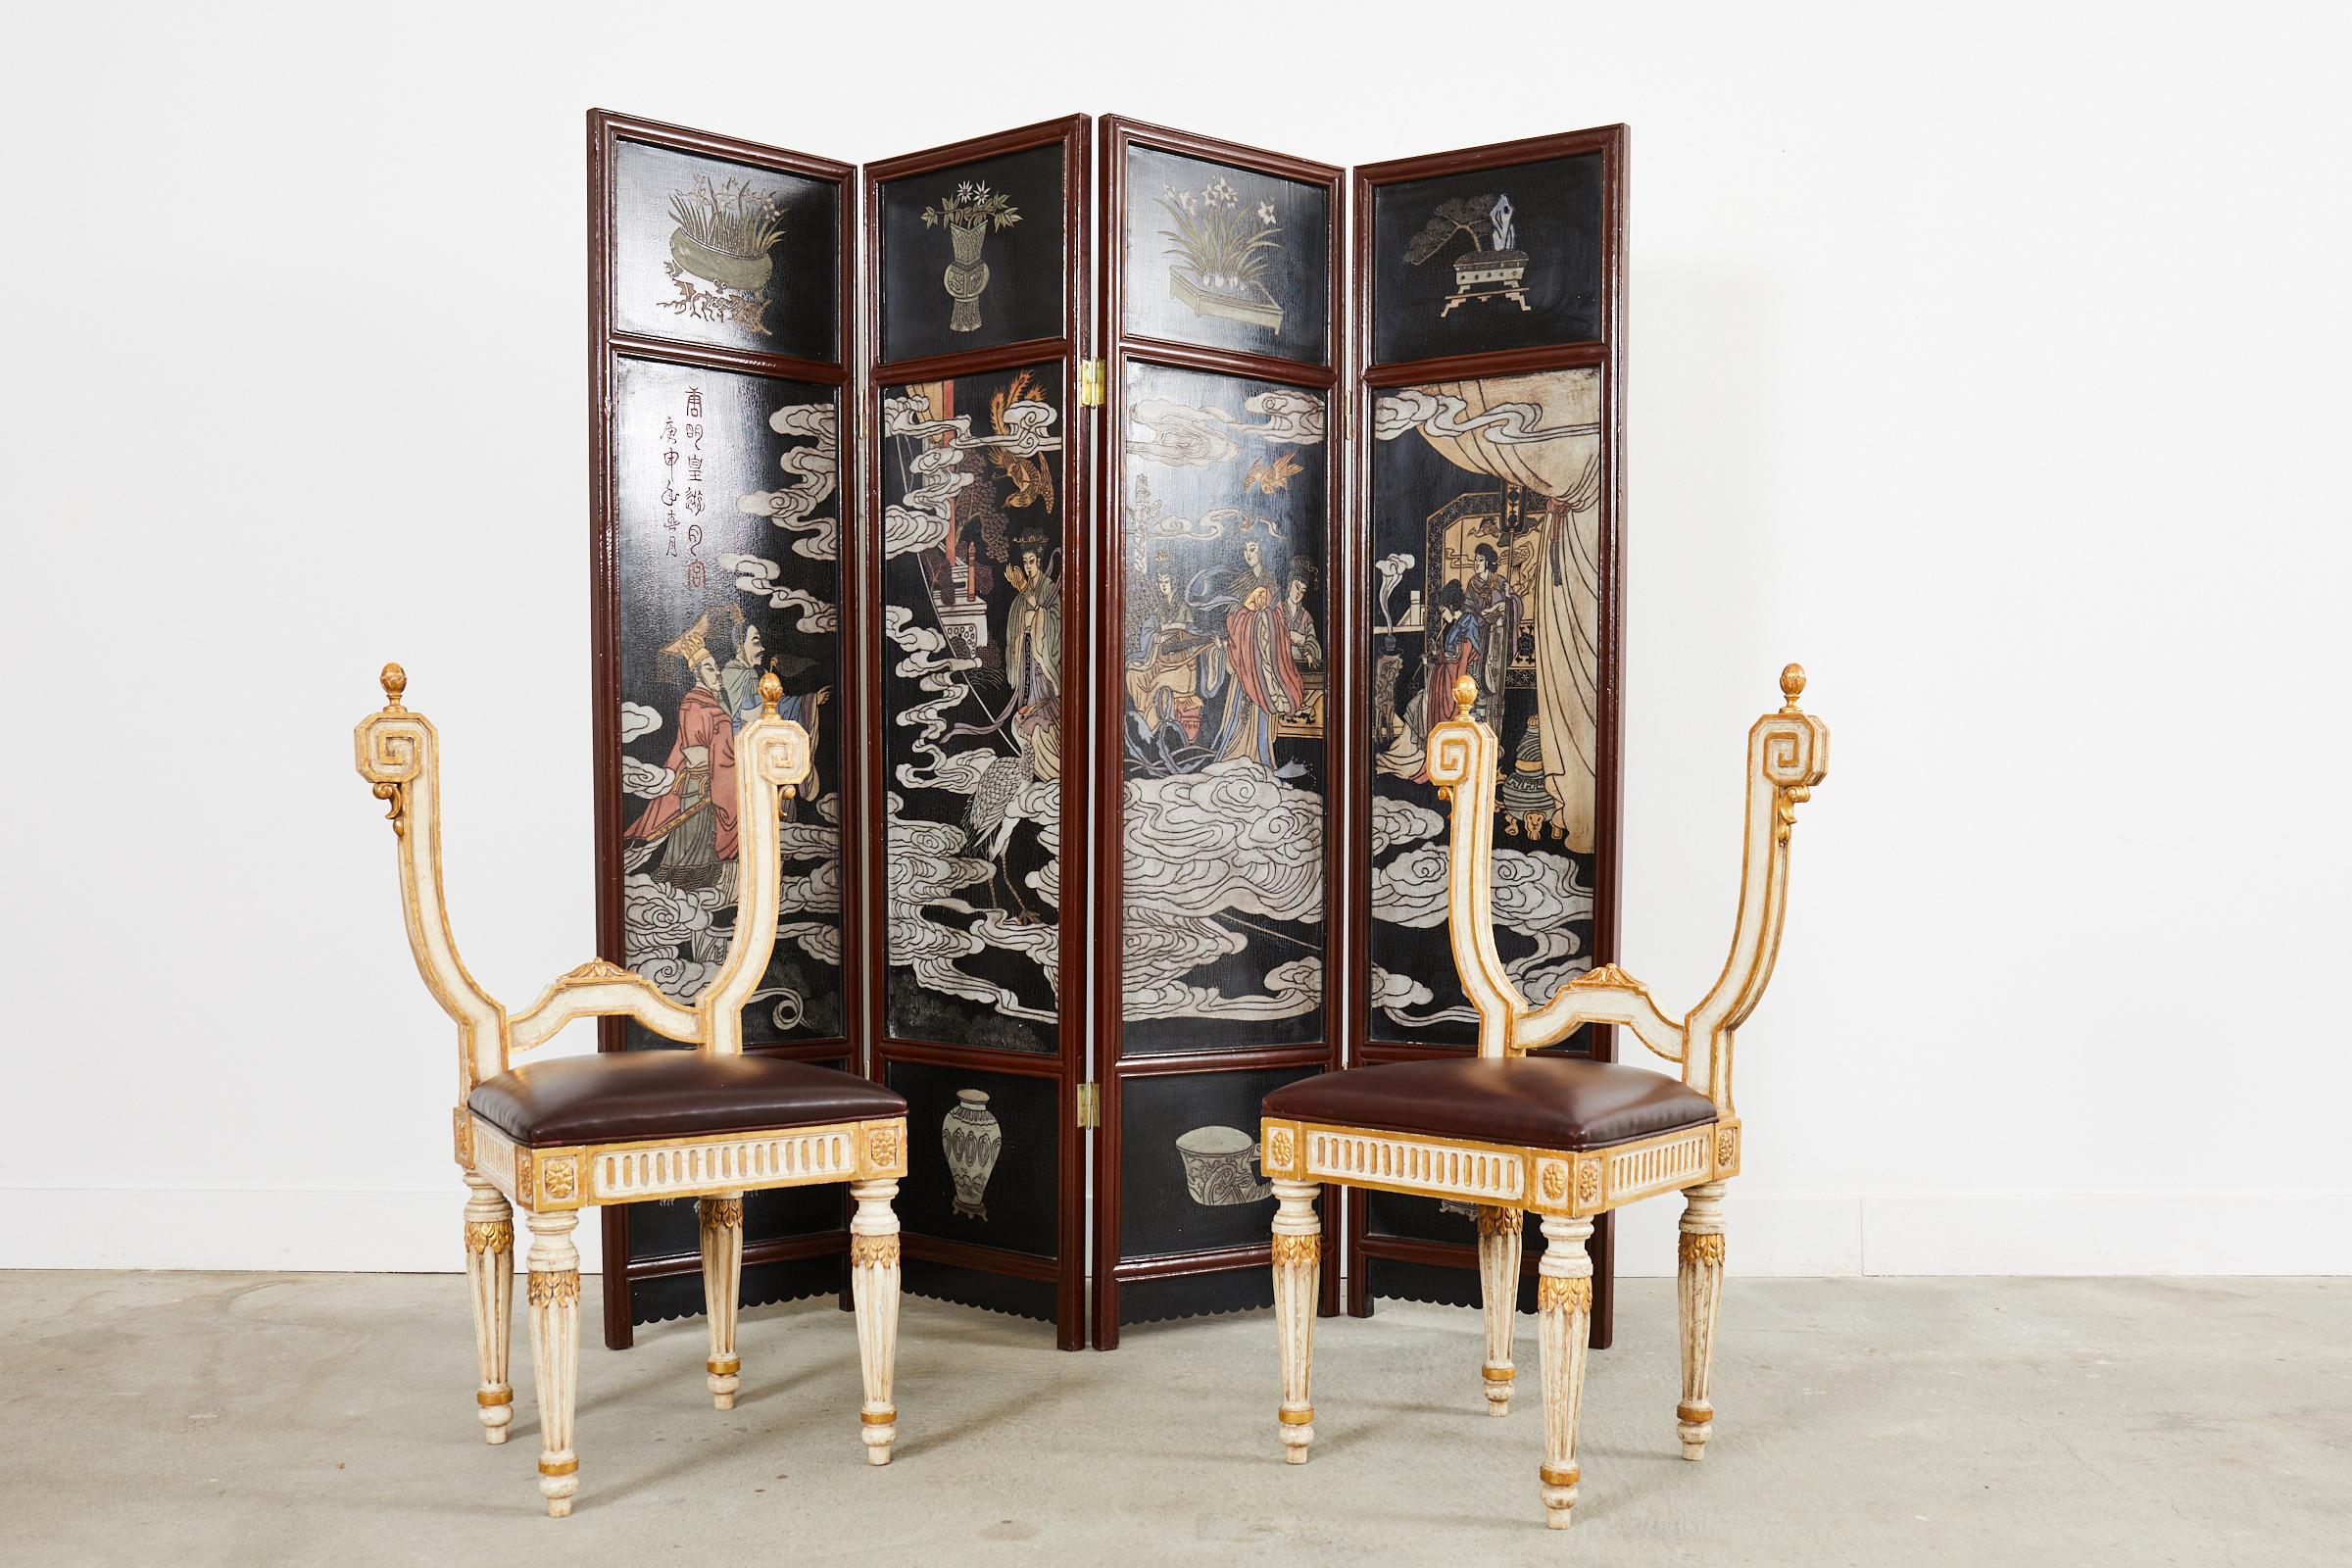 Opulent pair of Italian hall chairs made in the neoclassical style. The chairs feature a backless design having decorative molded raised arms ending with large greek keys topped with finials. The frames have an intentionally aged, distressed lacquer